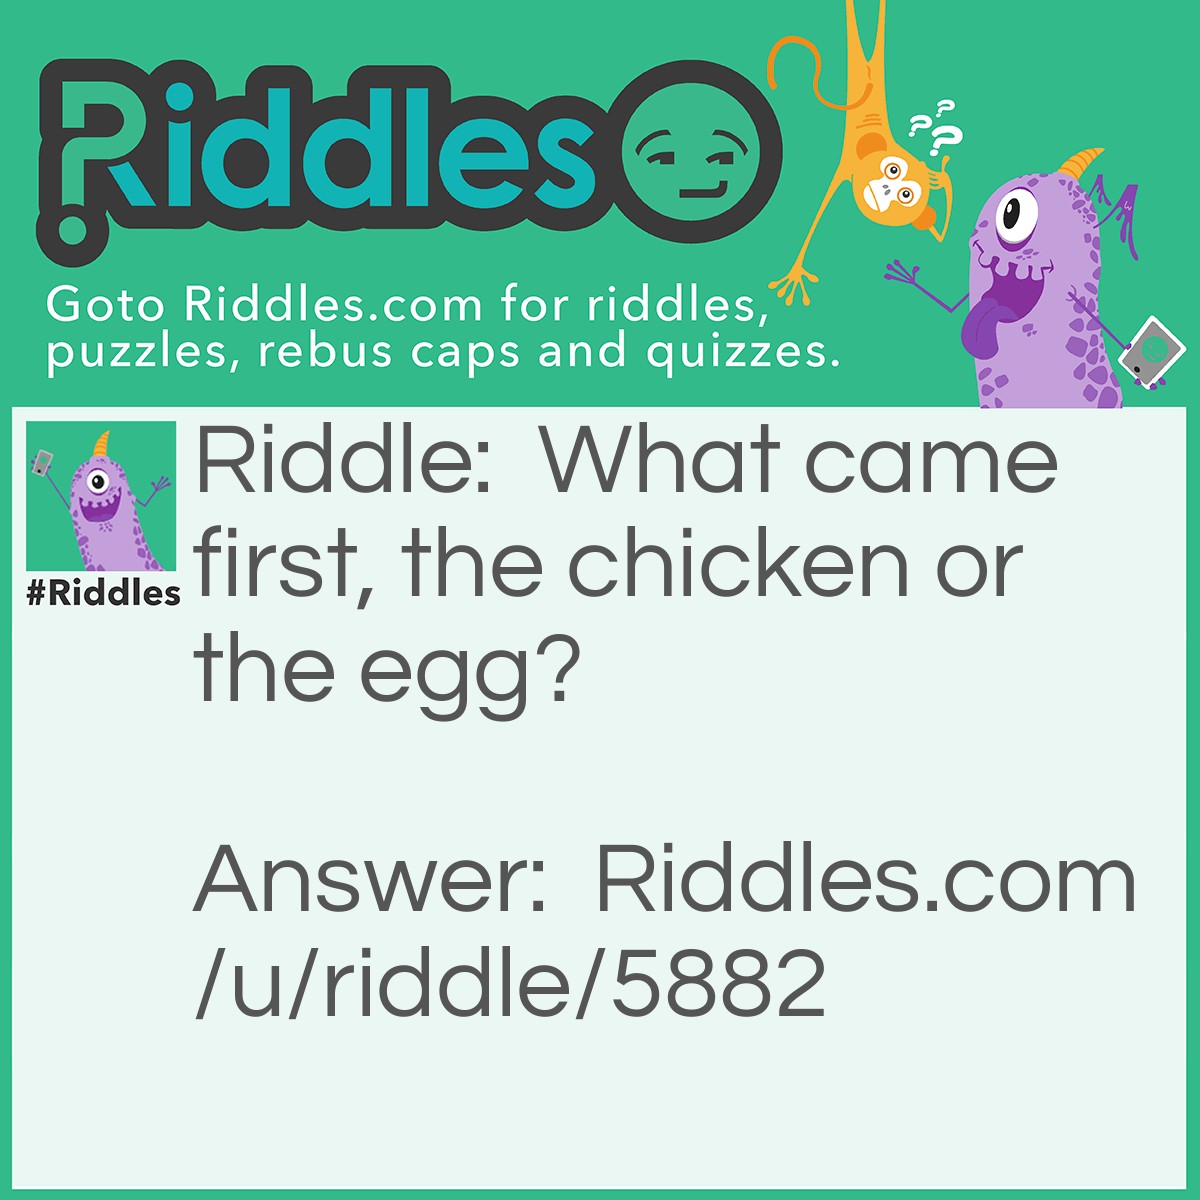 Riddle: What came first, the chicken or the egg? Answer: Dinosaurs laid eggs much before evolution of chicken.